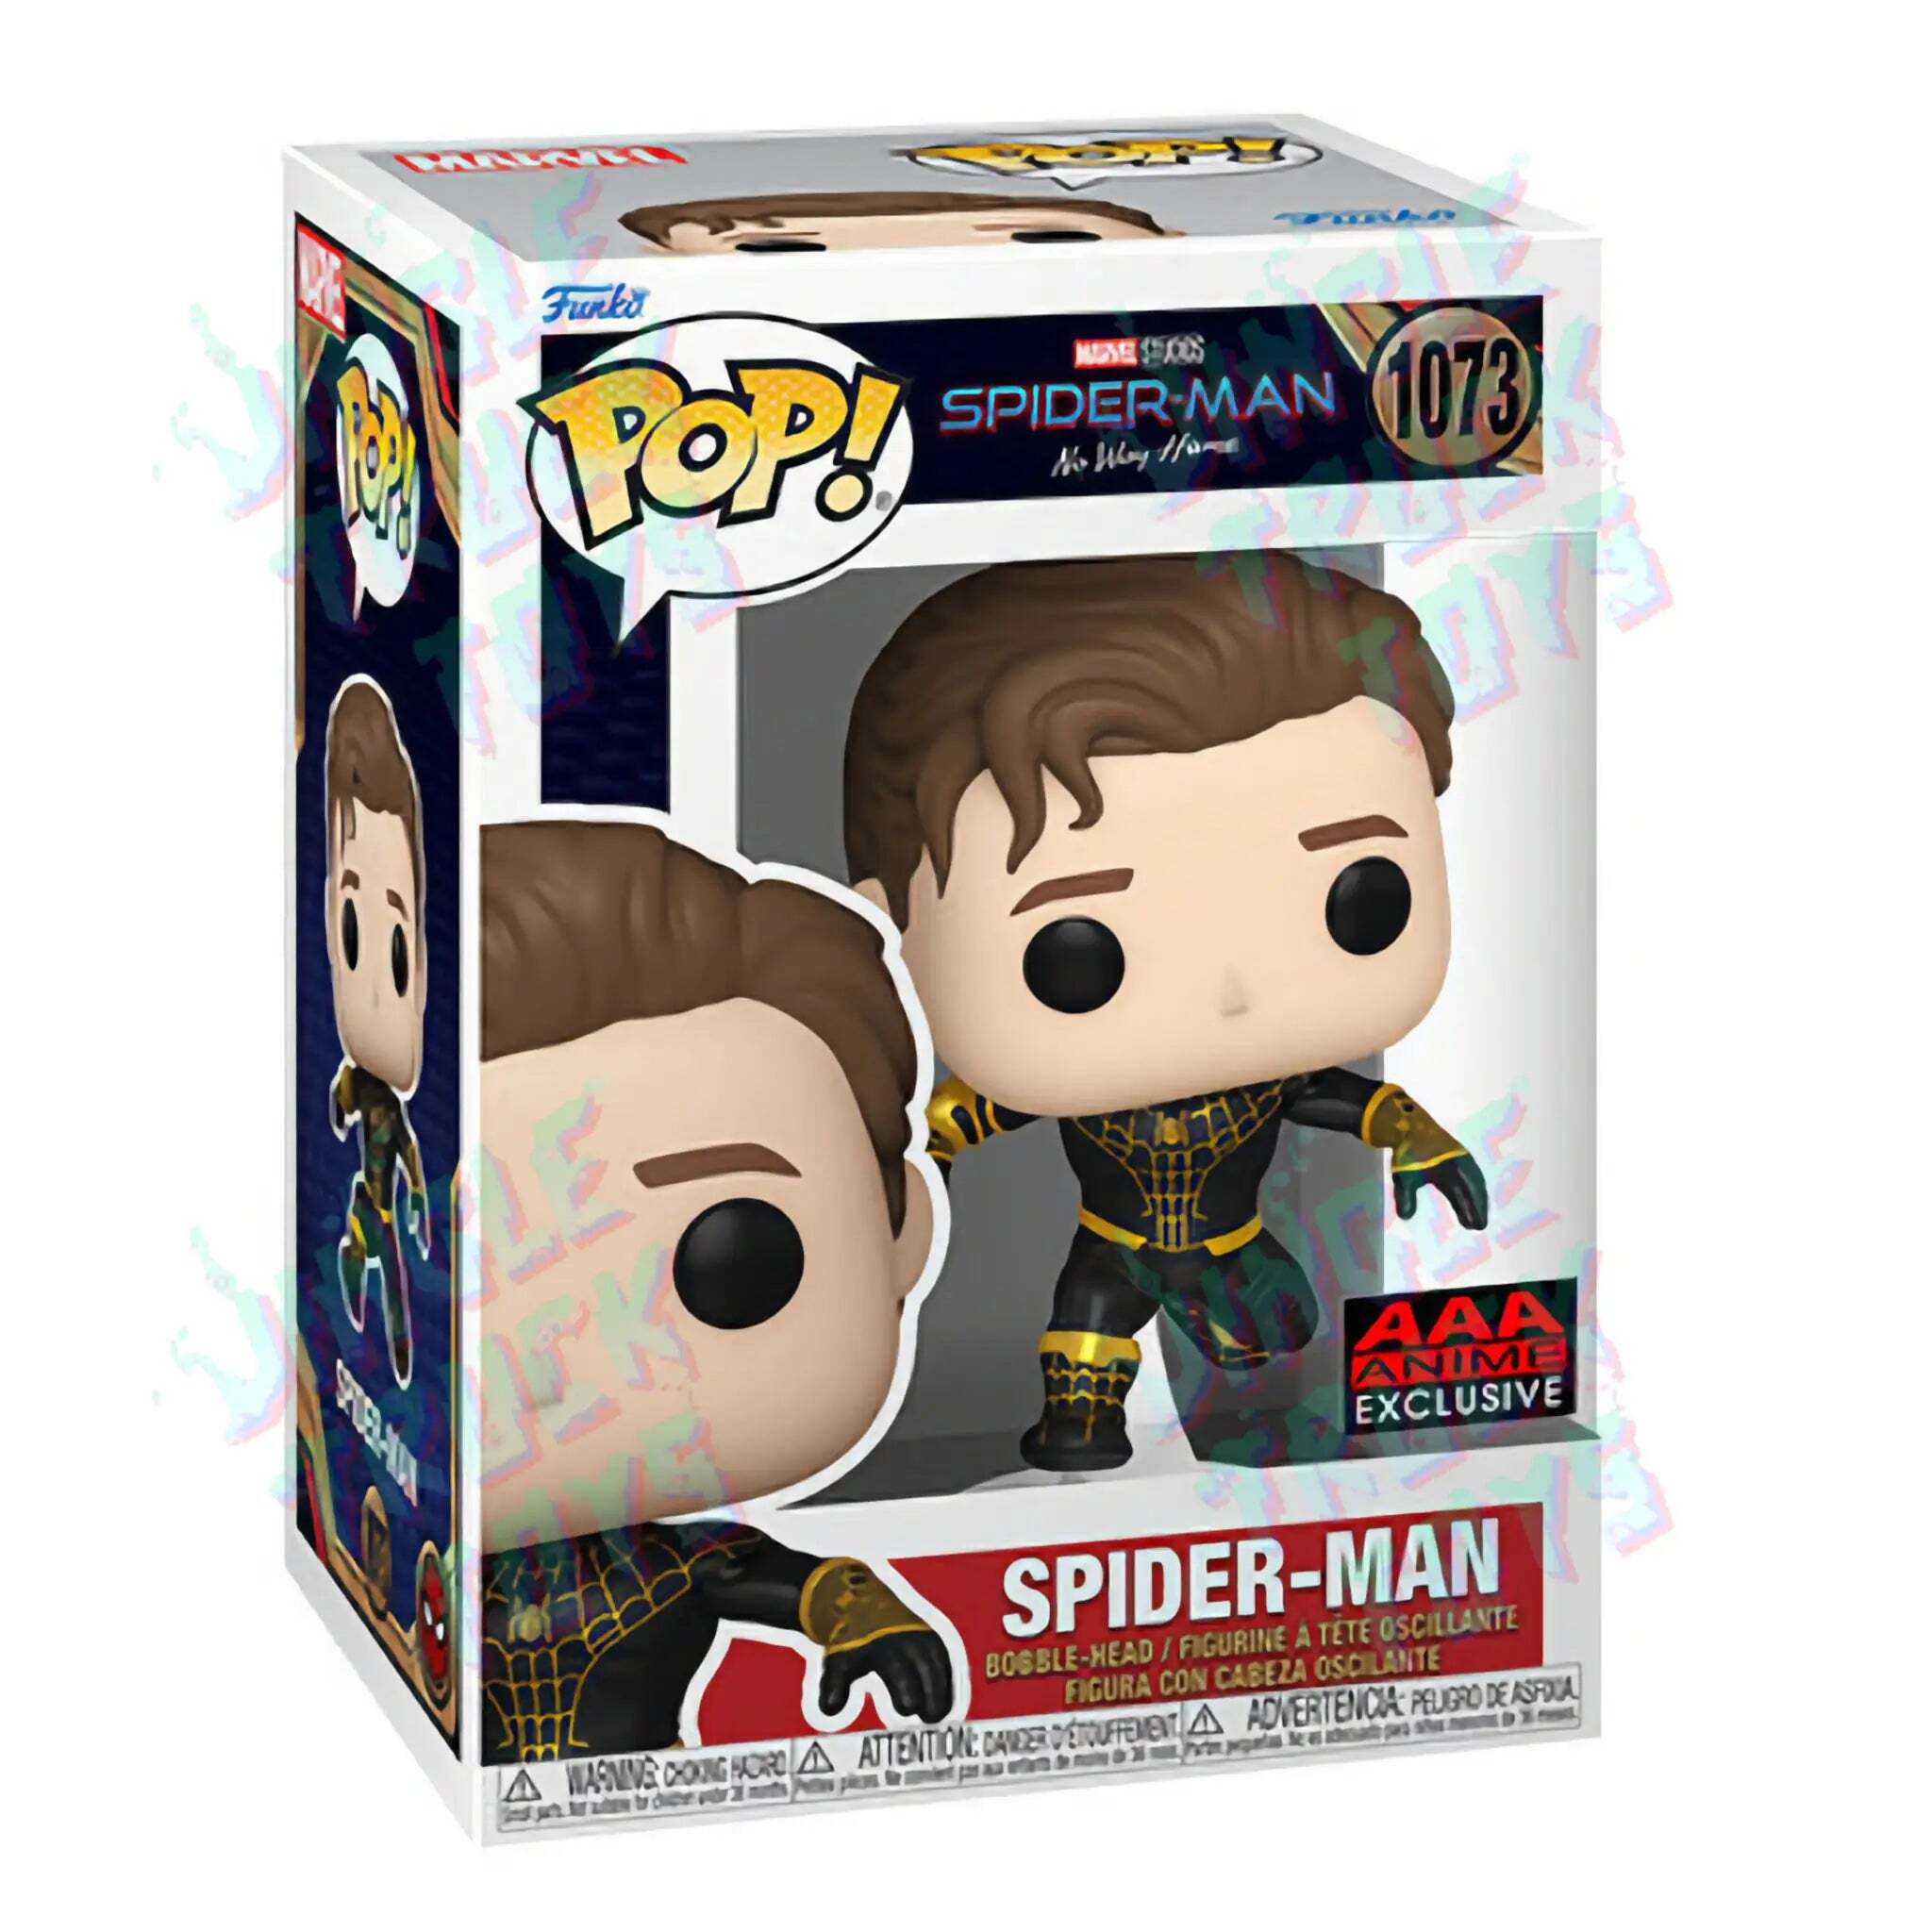 Spider-Man (Leaping | Unmasked) Funko Pop! AAA ANIME EXCLUSIVE